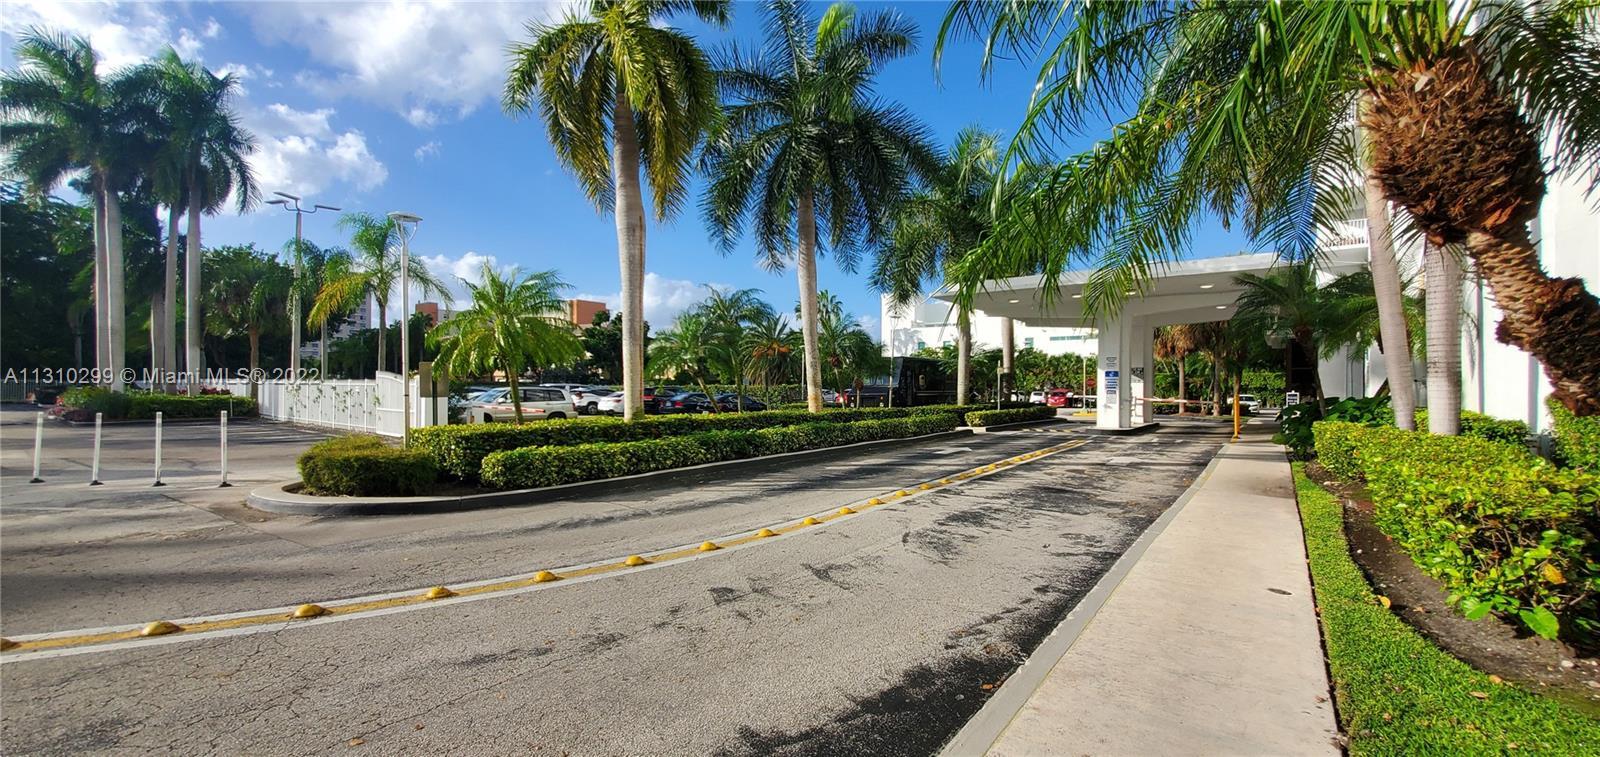 WELCOME TO THE WELL SOUGHT AFTER ADMIRALS PORT CONDOMINIUM!! THIS UPDATED GATED ENTRY BUILDING FEATU